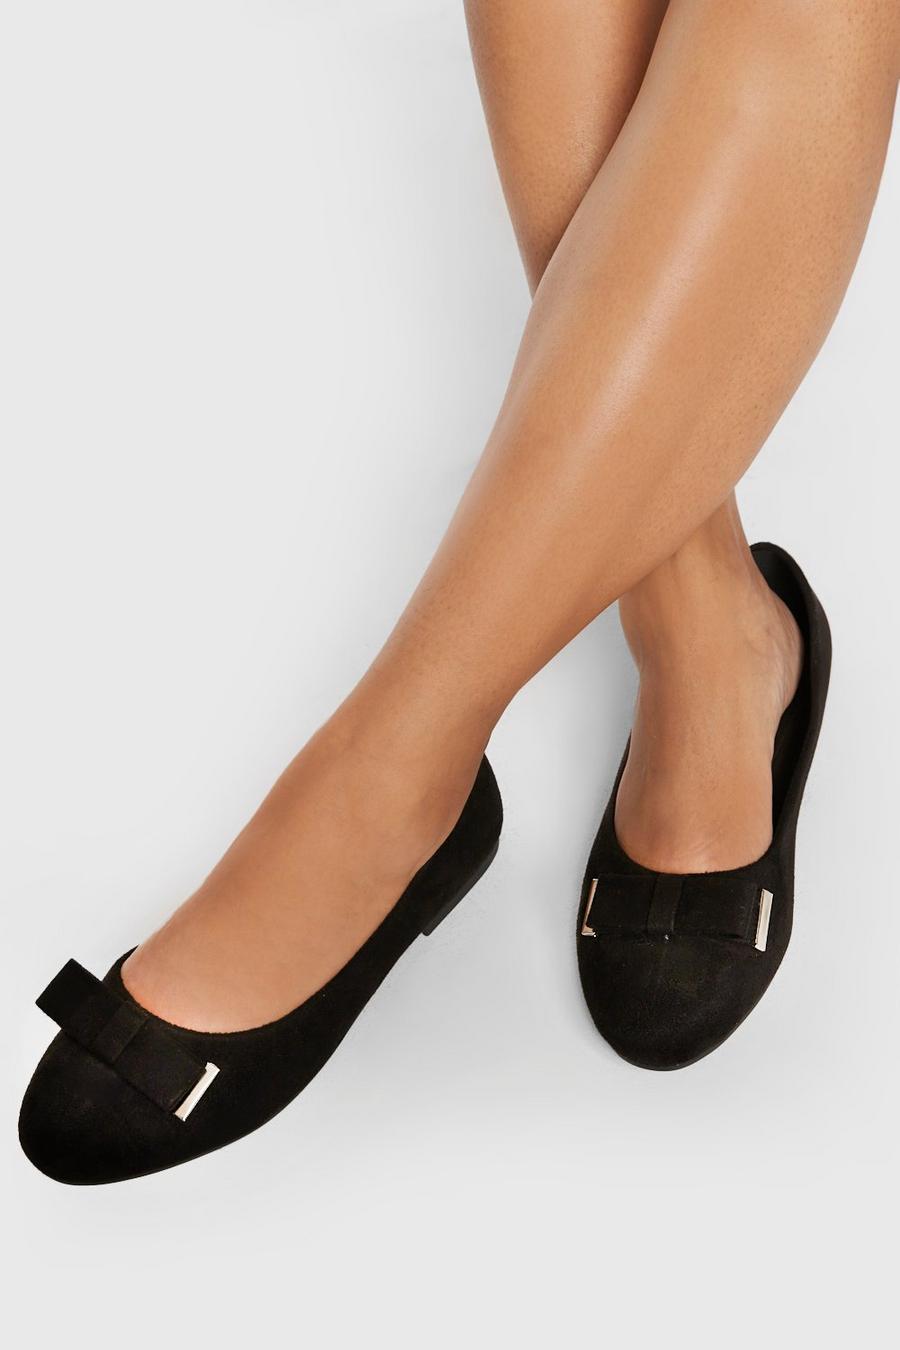 Boohoo Wide Width Immy Bow Ballet in Black Womens Shoes Flats and flat shoes Ballet flats and ballerina shoes 